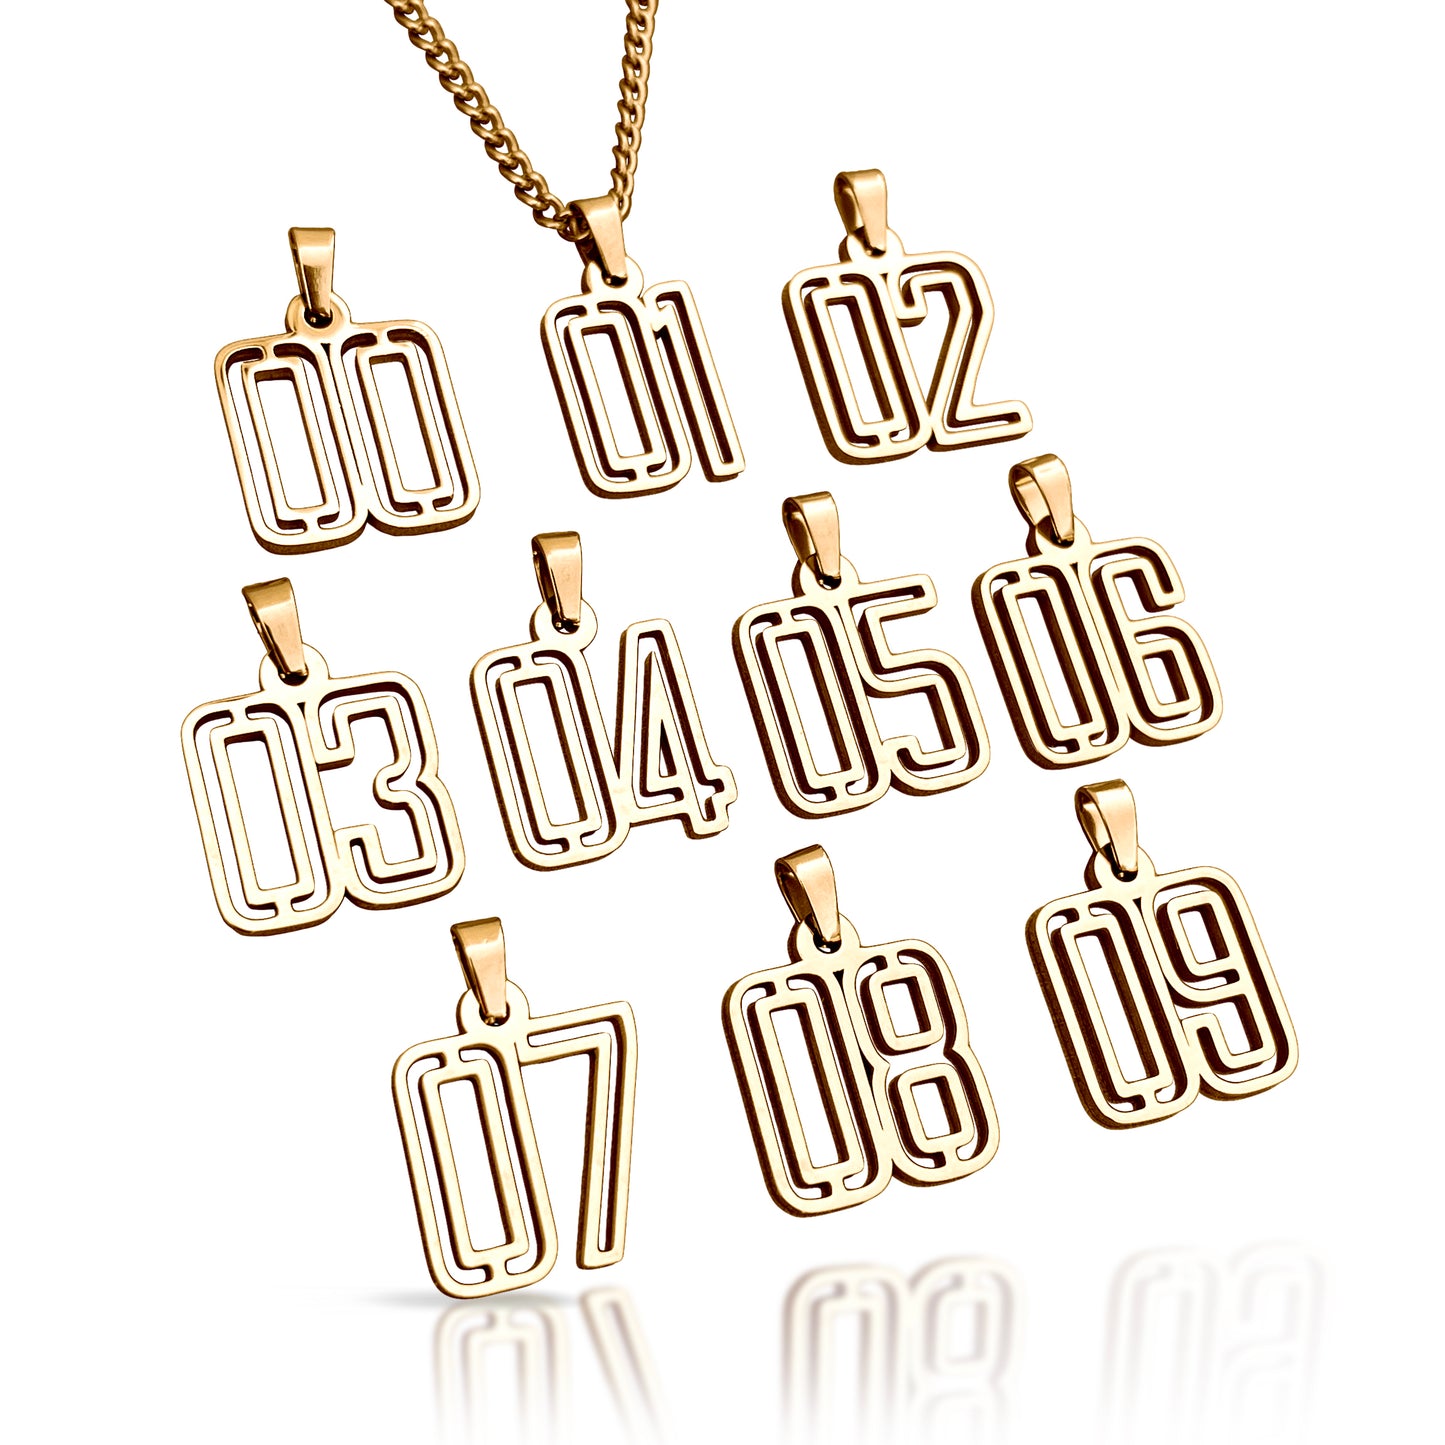 00-09 Varsity Number Pendants With Chain Necklace - 14K Gold Plated Stainless Steel